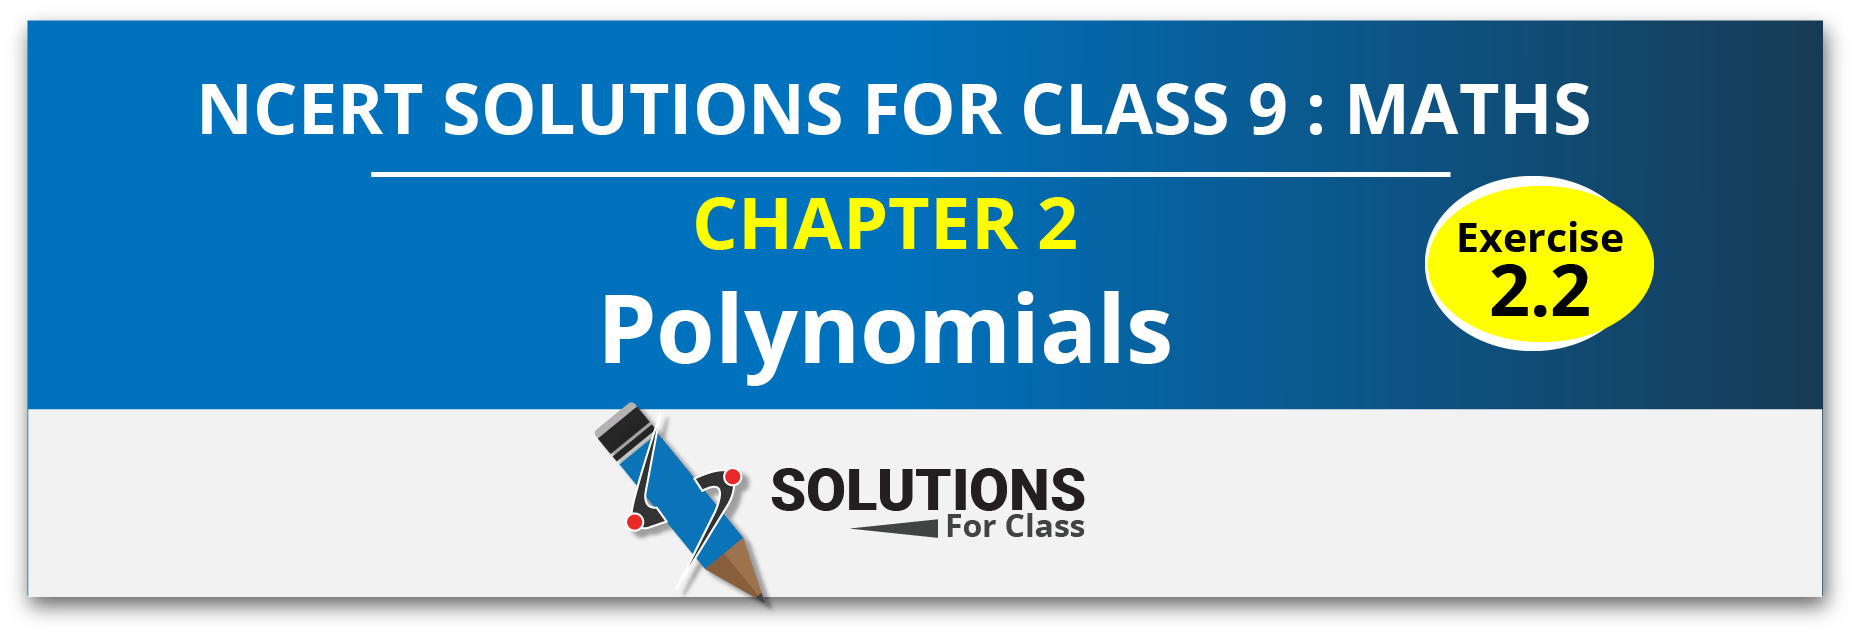 NCERT Solution For Class 9, Maths, Chapter 2, Polynomials, Exercise 2.2